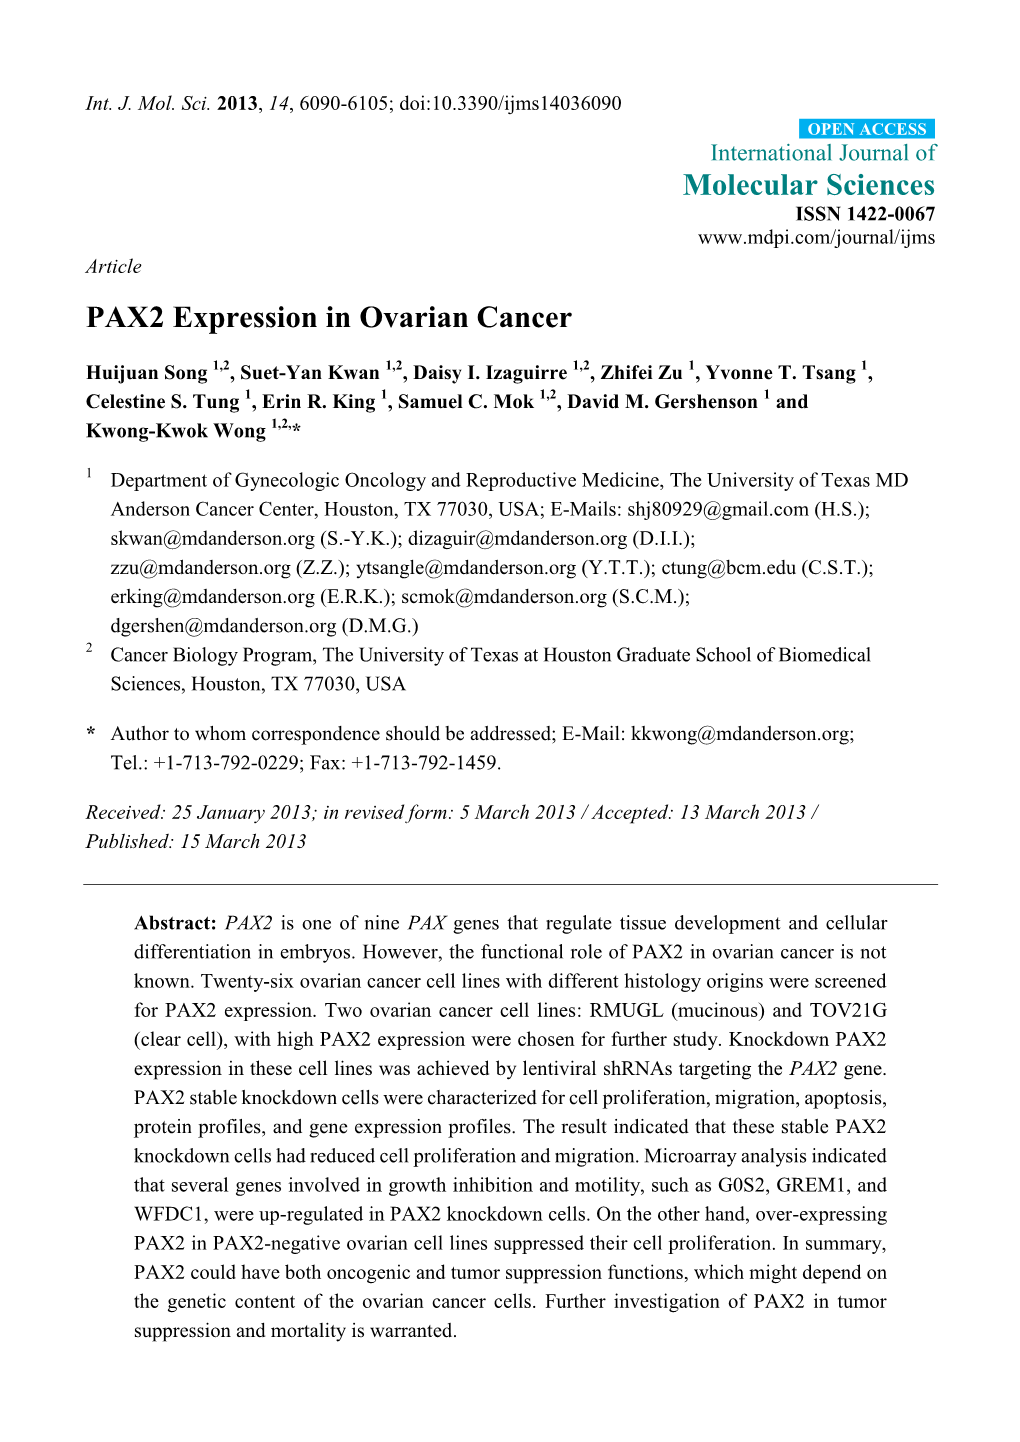 PAX2 Expression in Ovarian Cancer